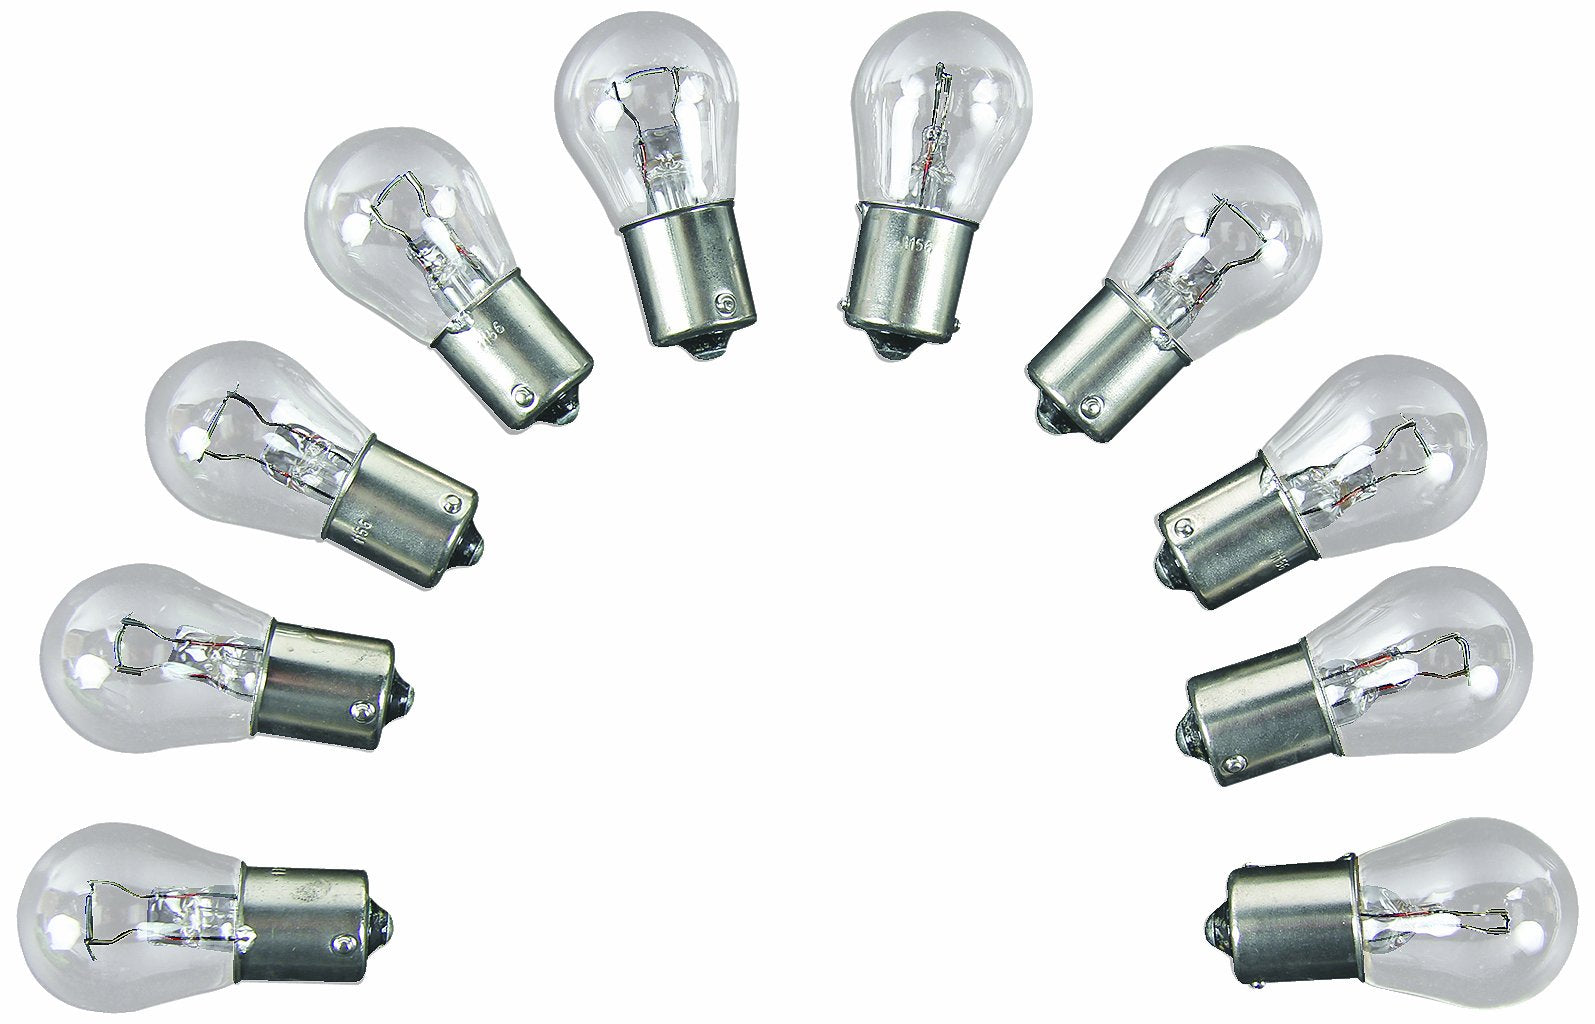 Camco 54802 Replacement 1156 Auto Back Up Light Bulb - Box of 10